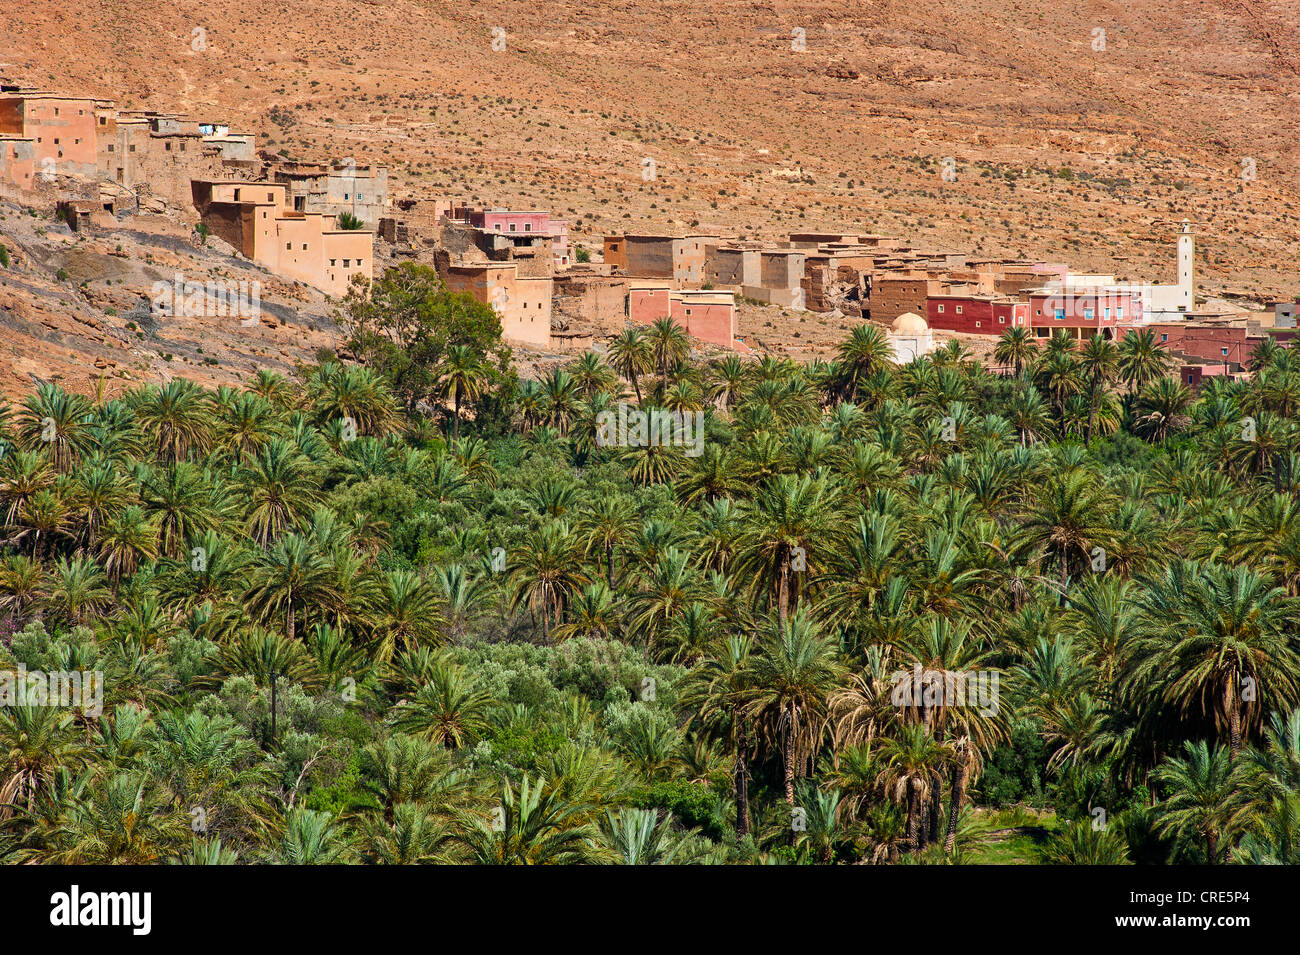 Small Berber village with a mosque and a palm grove, Ait Mansour Valley, Anti-Atlas Mountains, southern Morocco, Morocco, Africa Stock Photo